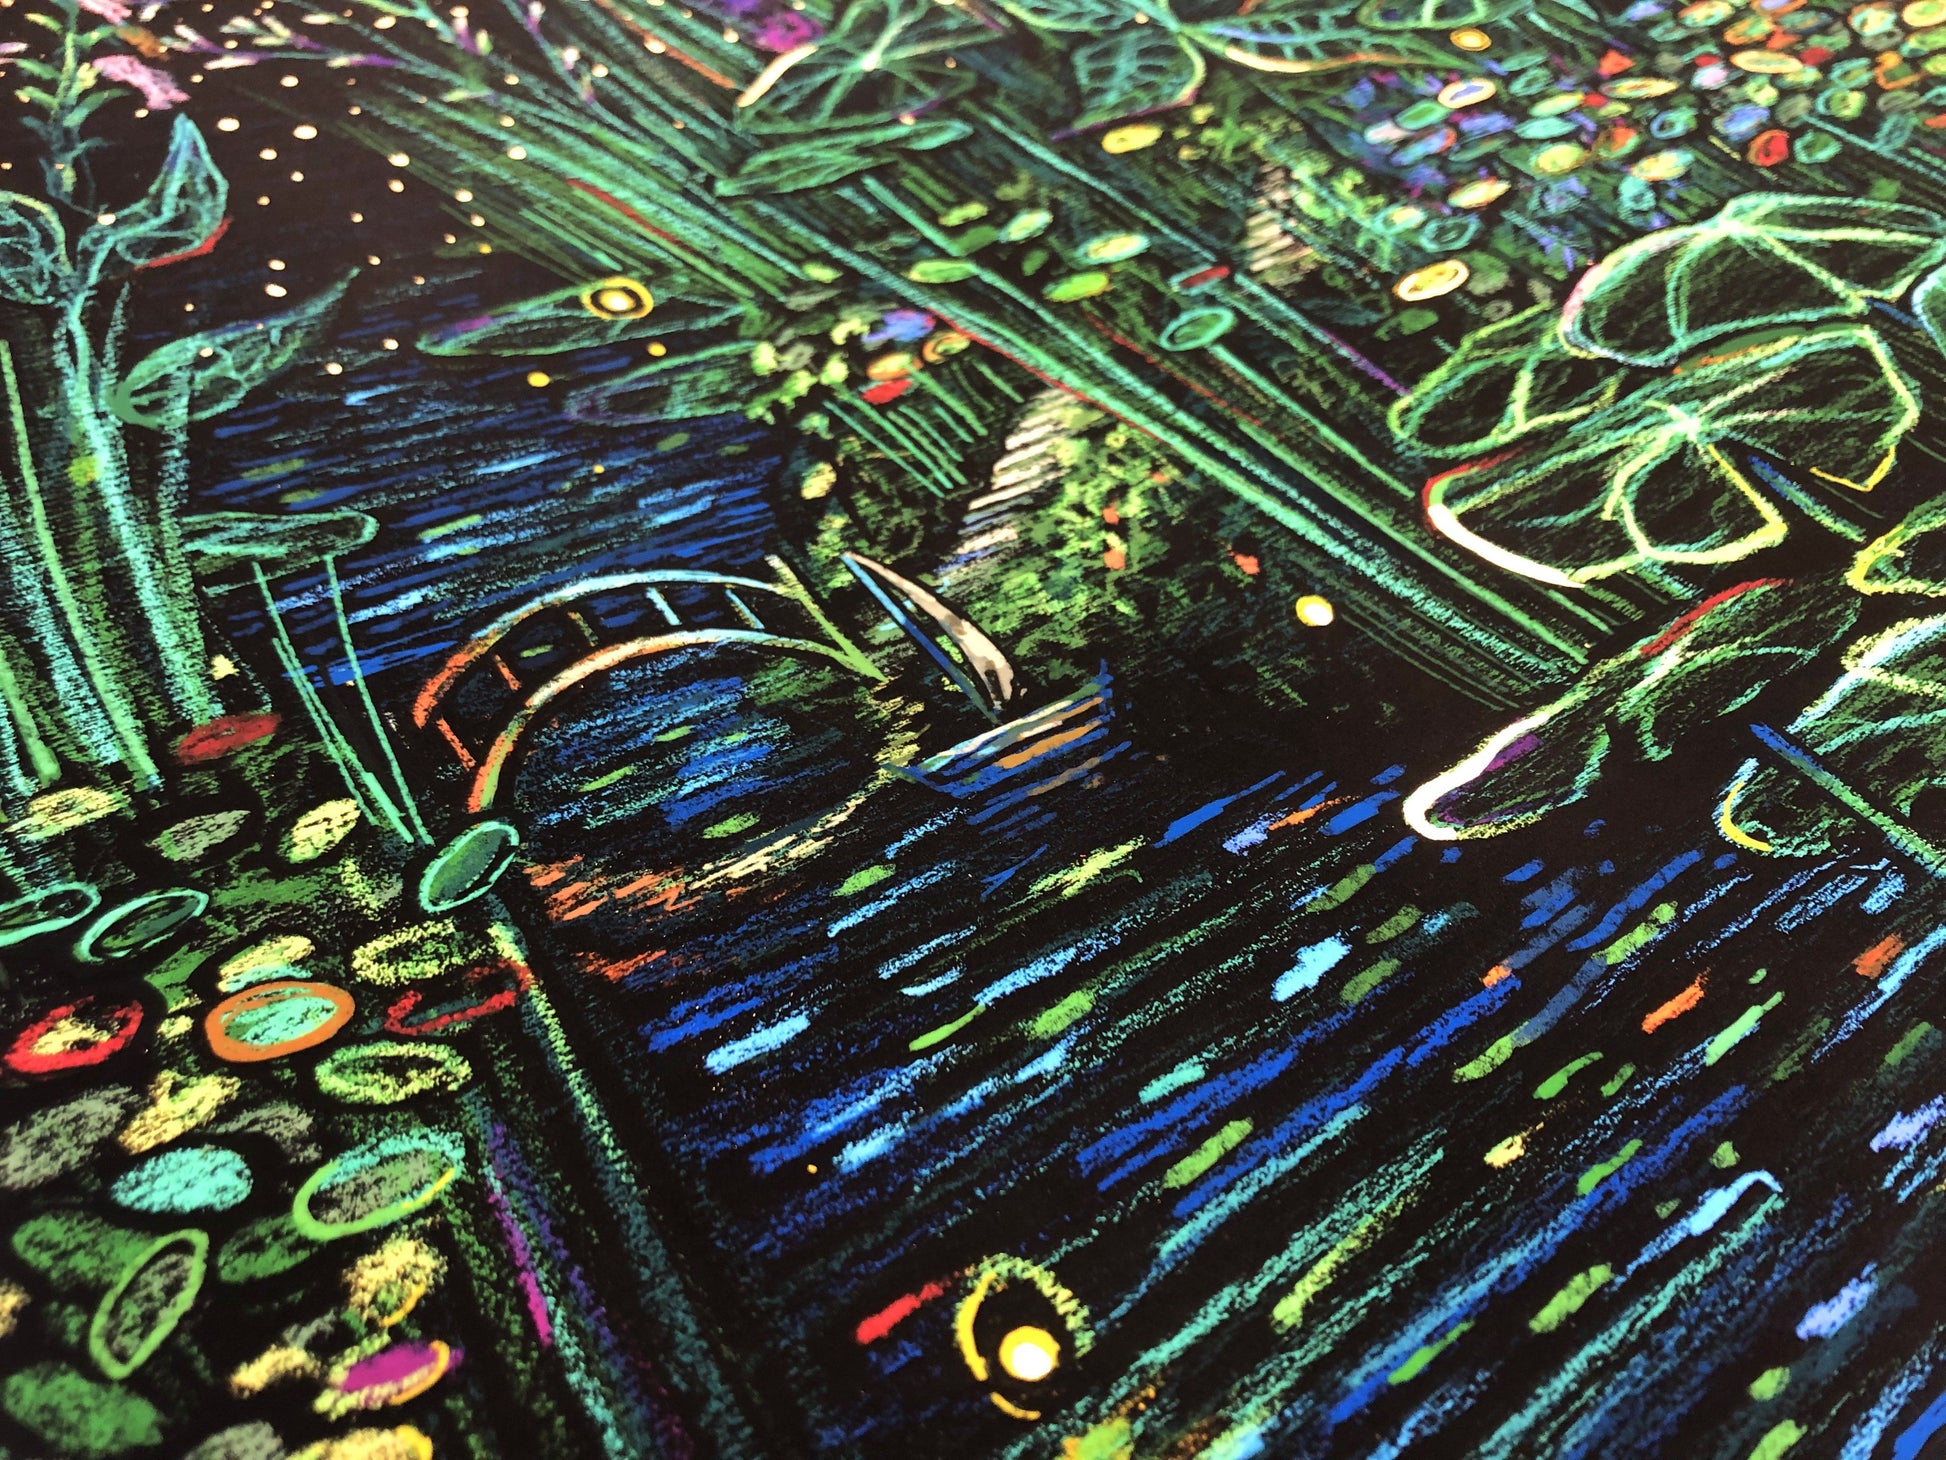 The Universe Blooming (Gold Leaf Edition of 33) James R. Eads